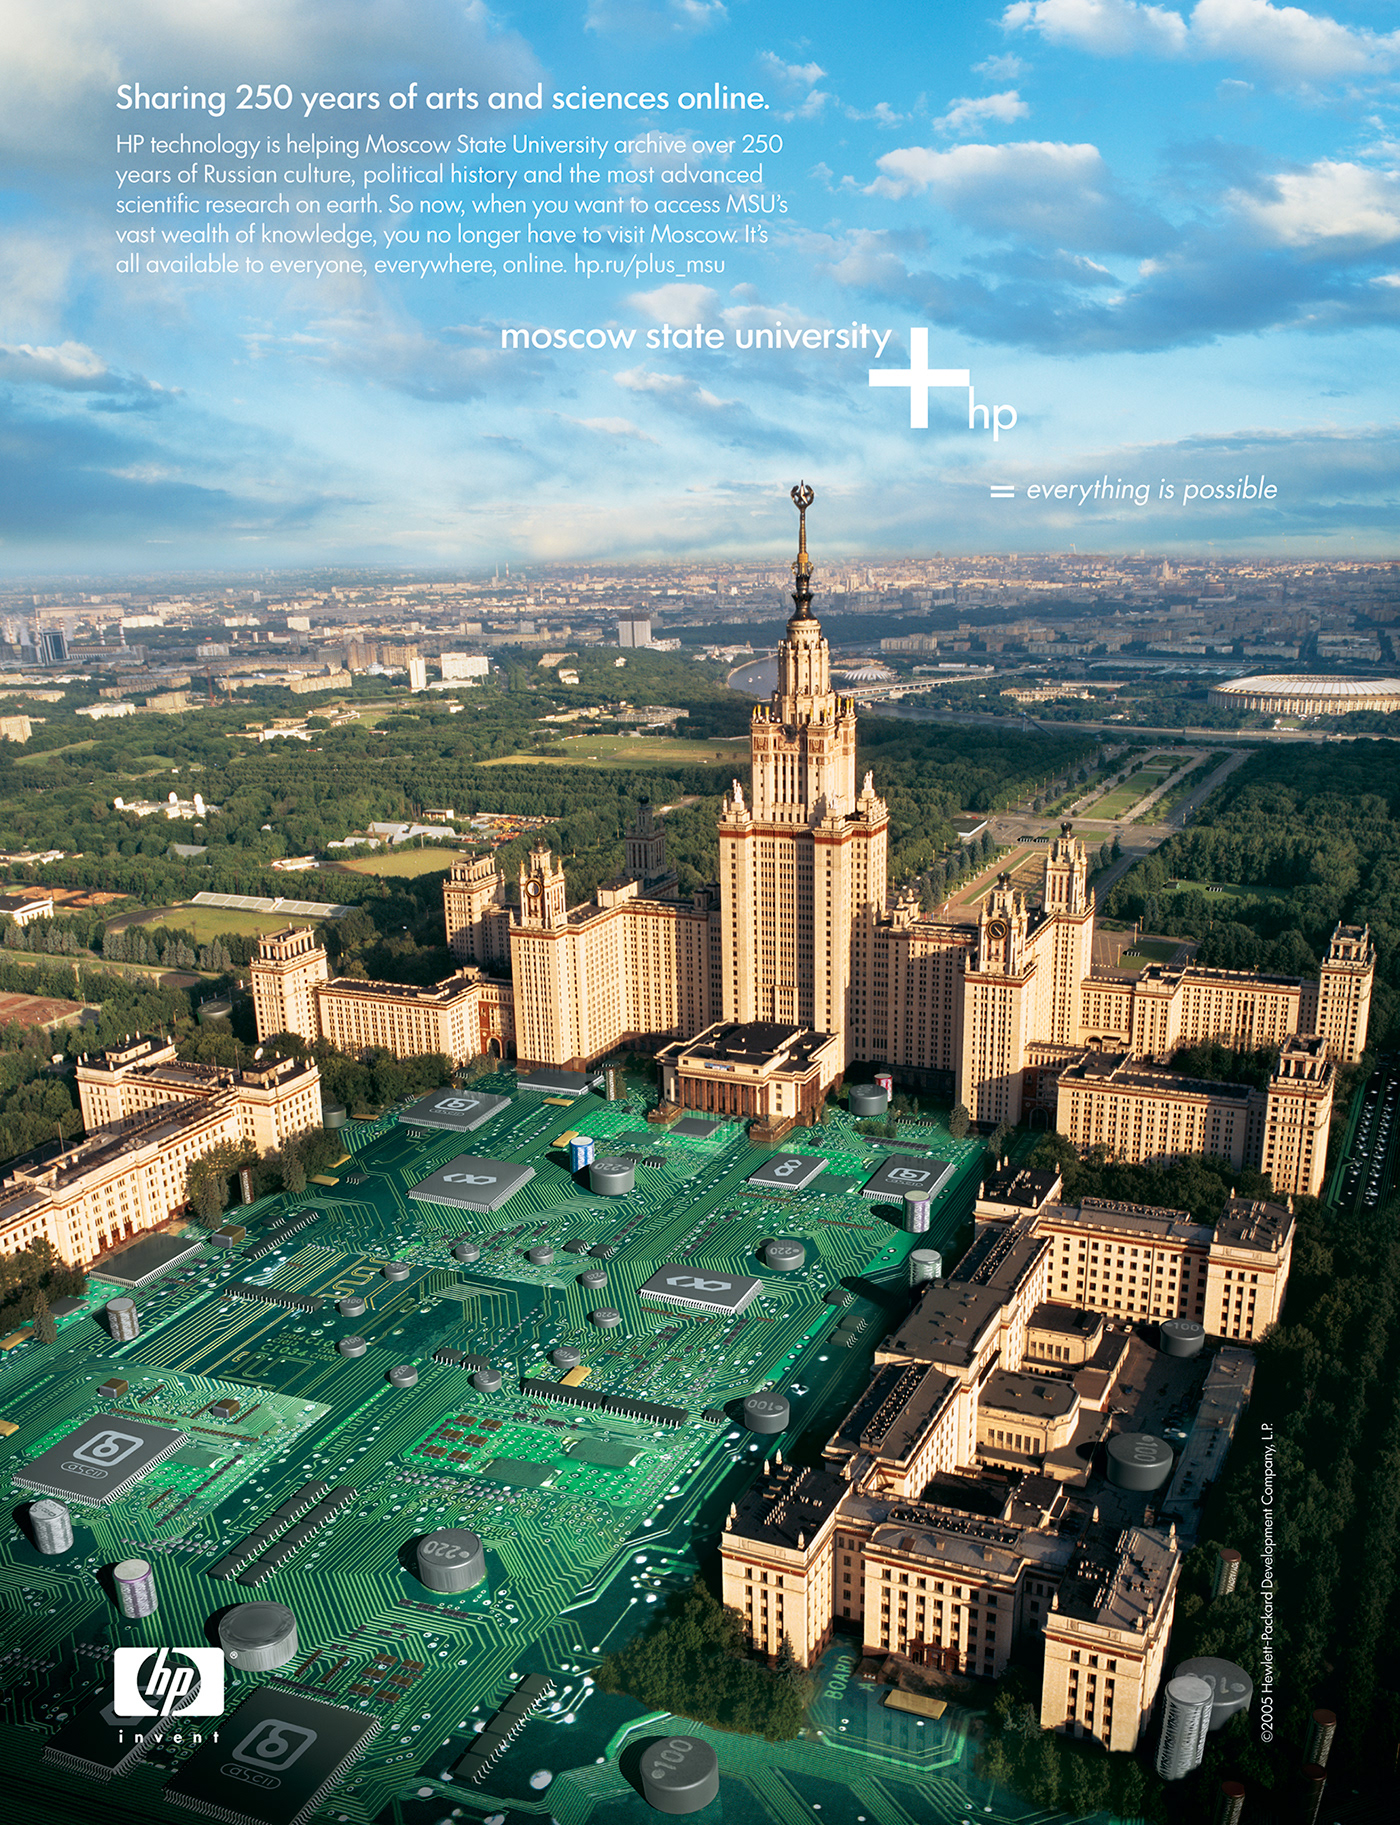 hp Goodby Silverstien CGI 3D modeling Moscow Aerial Landscape advertisement cinema 4d